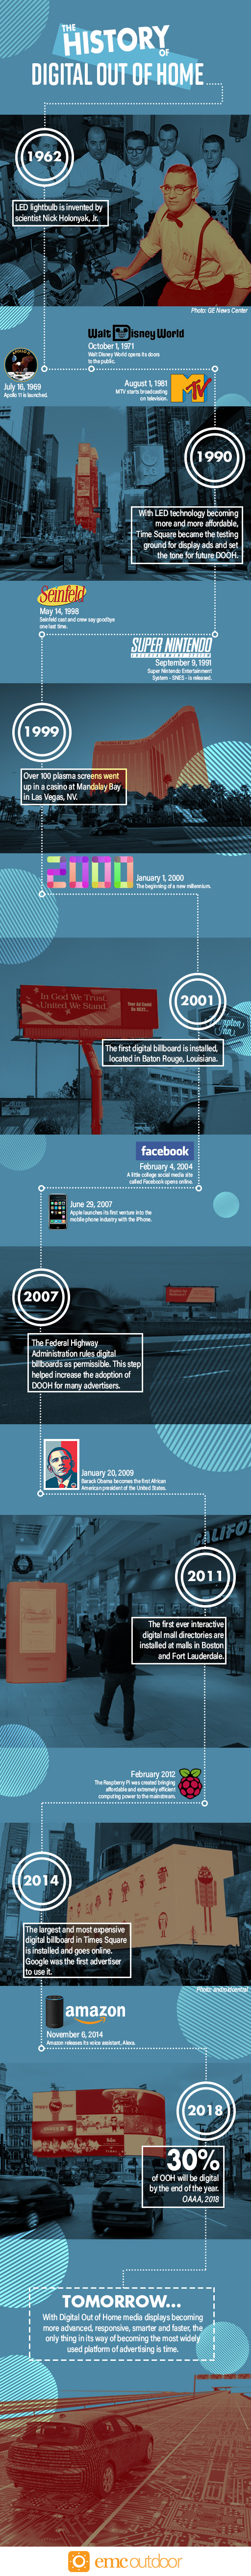 EMCOutdoor-History-of-Digital-Out-of-Home